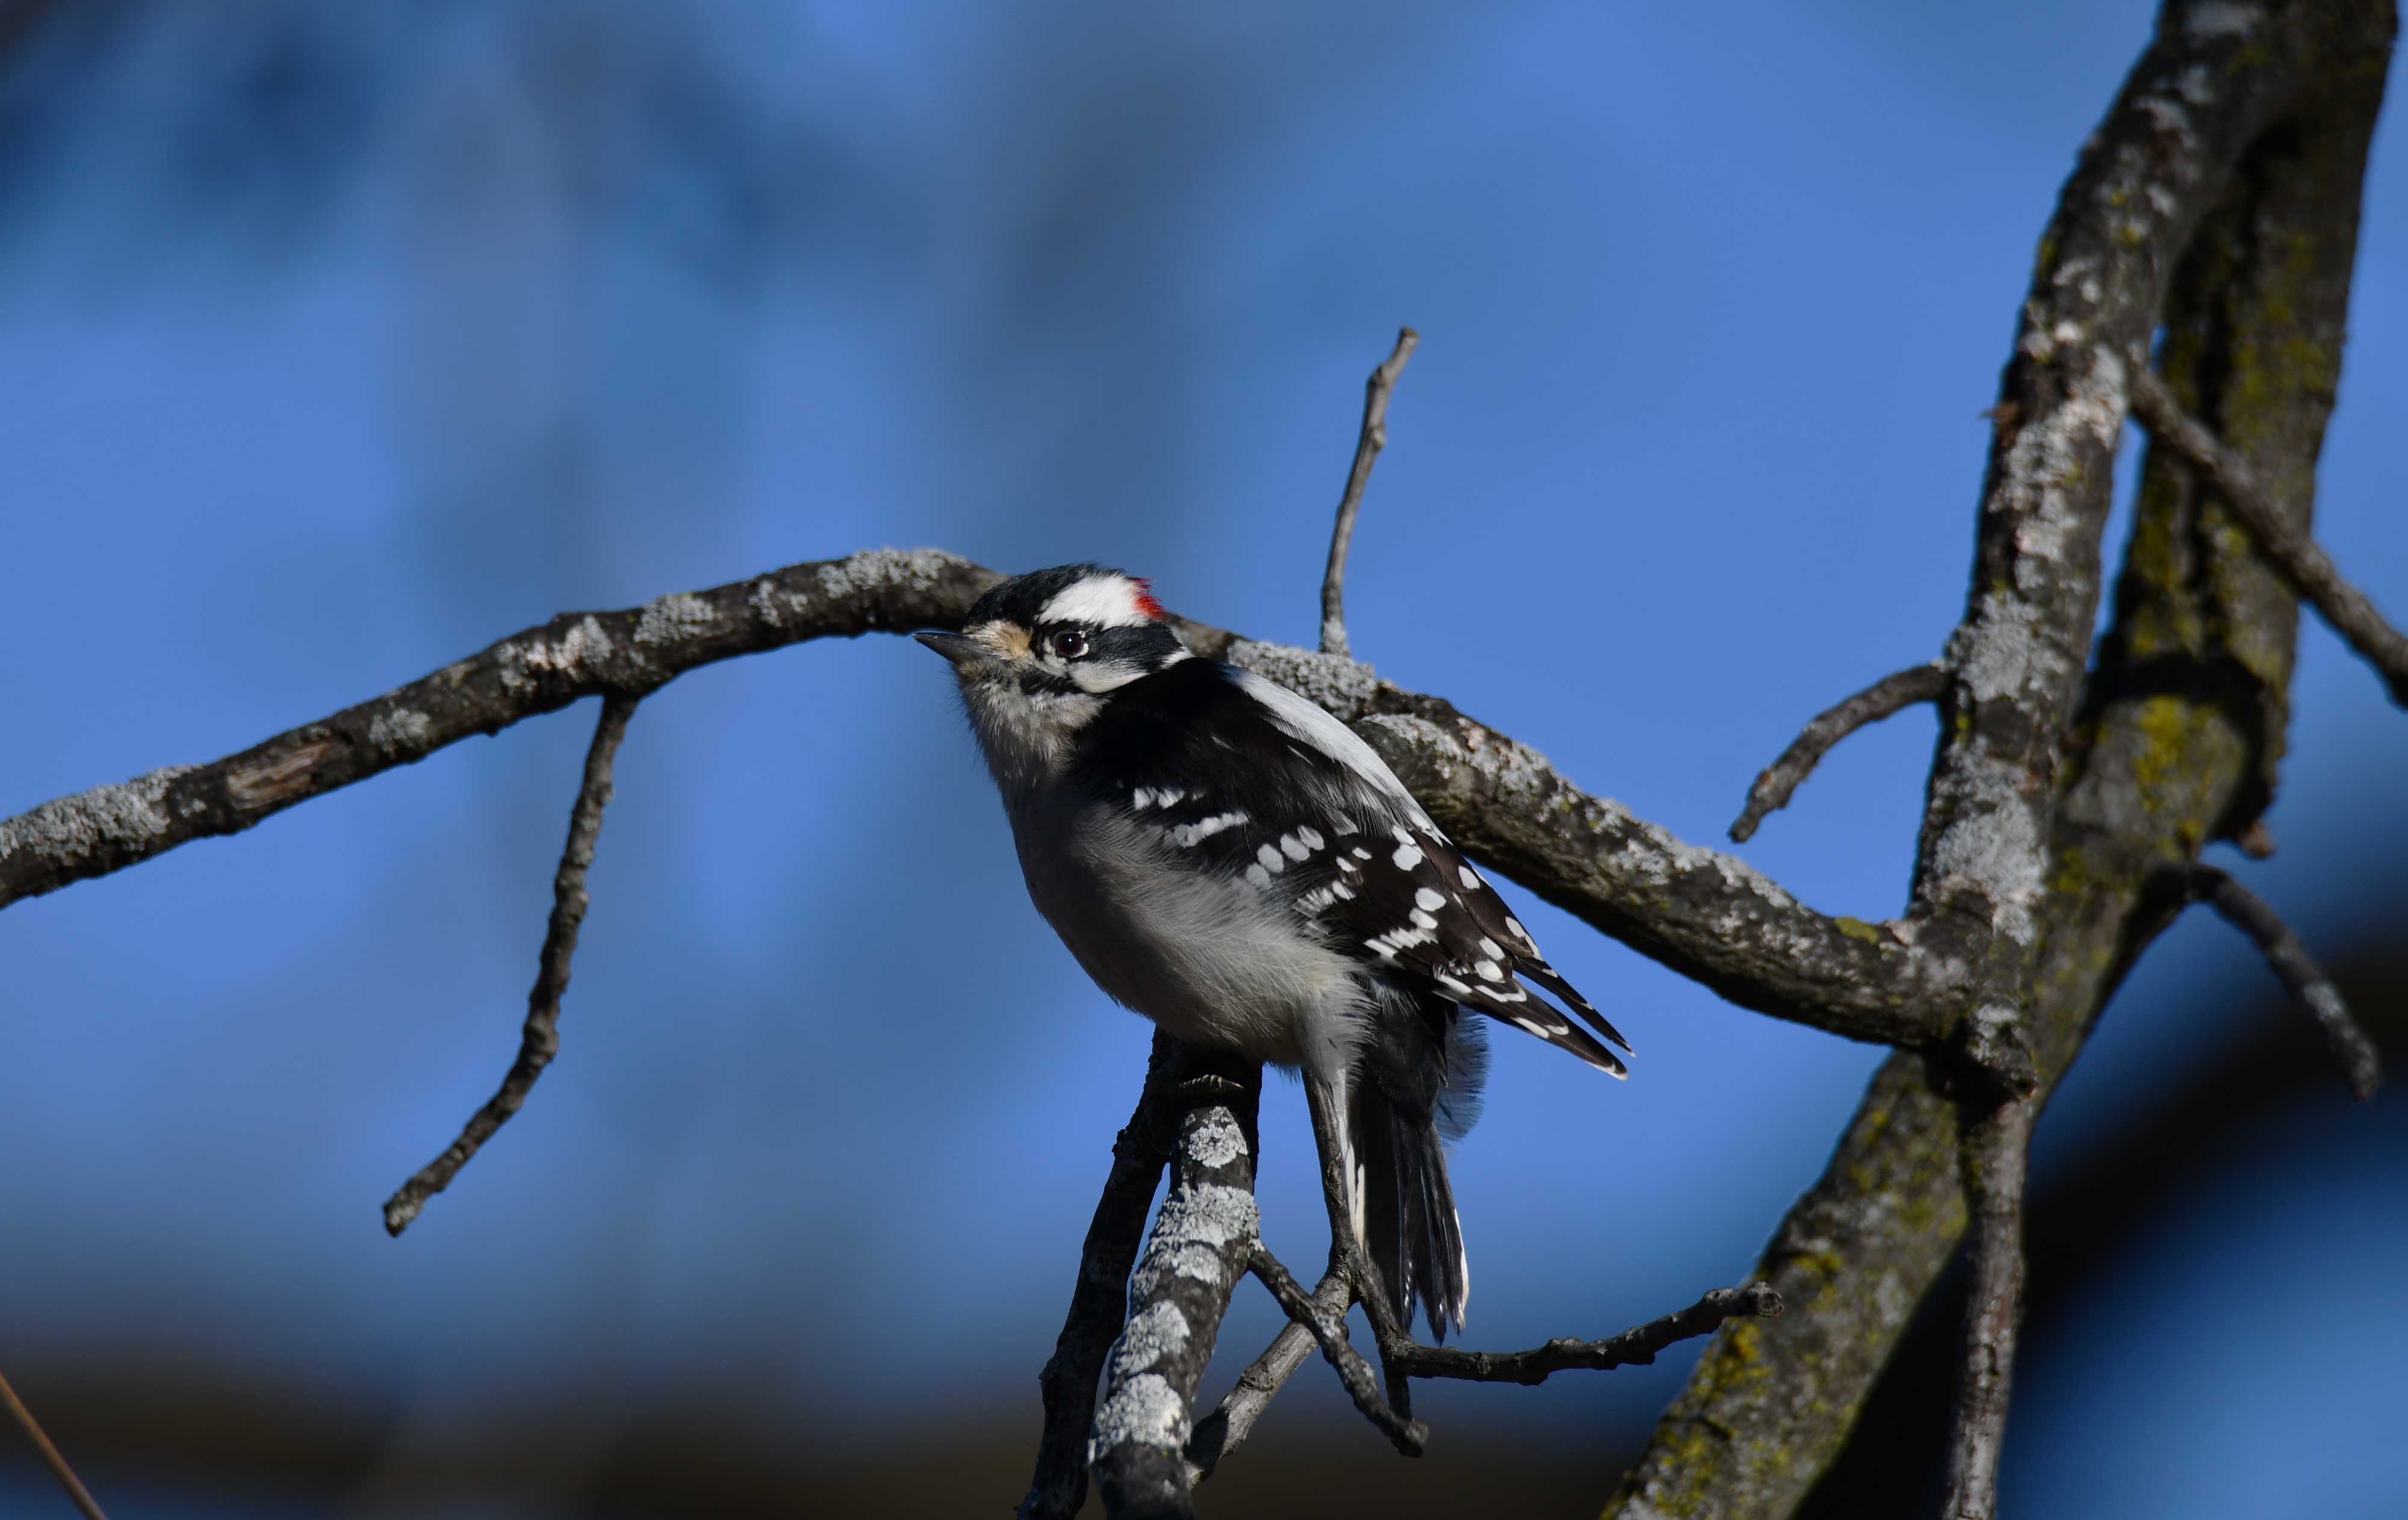 A downy woodpecker on a branch.